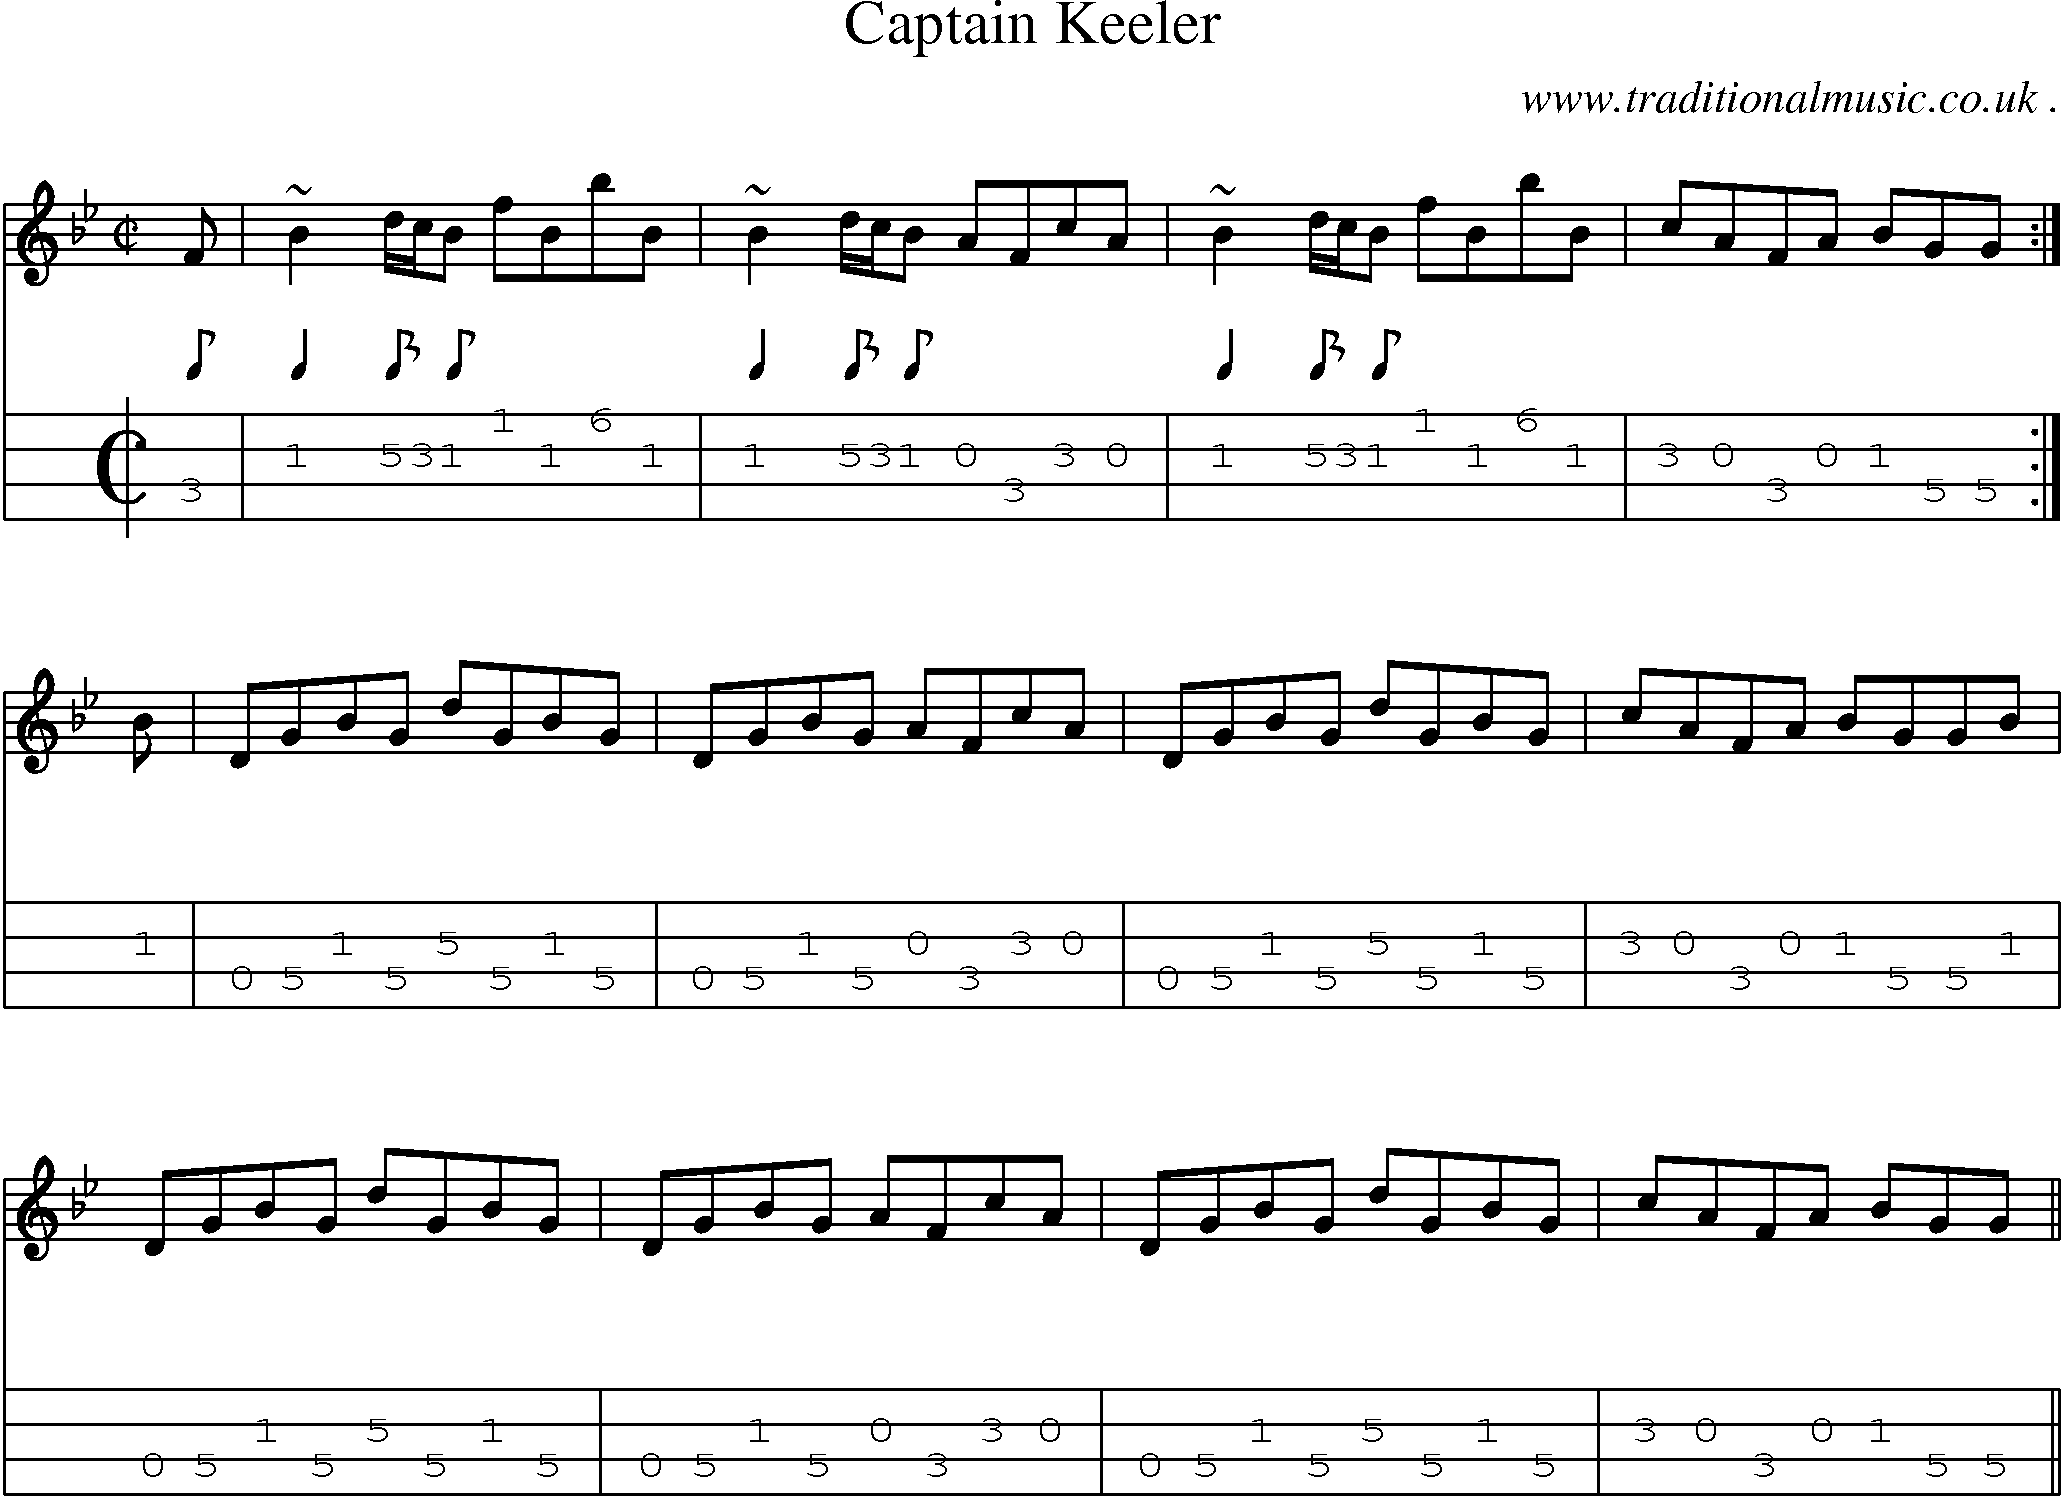 Sheet-music  score, Chords and Mandolin Tabs for Captain Keeler